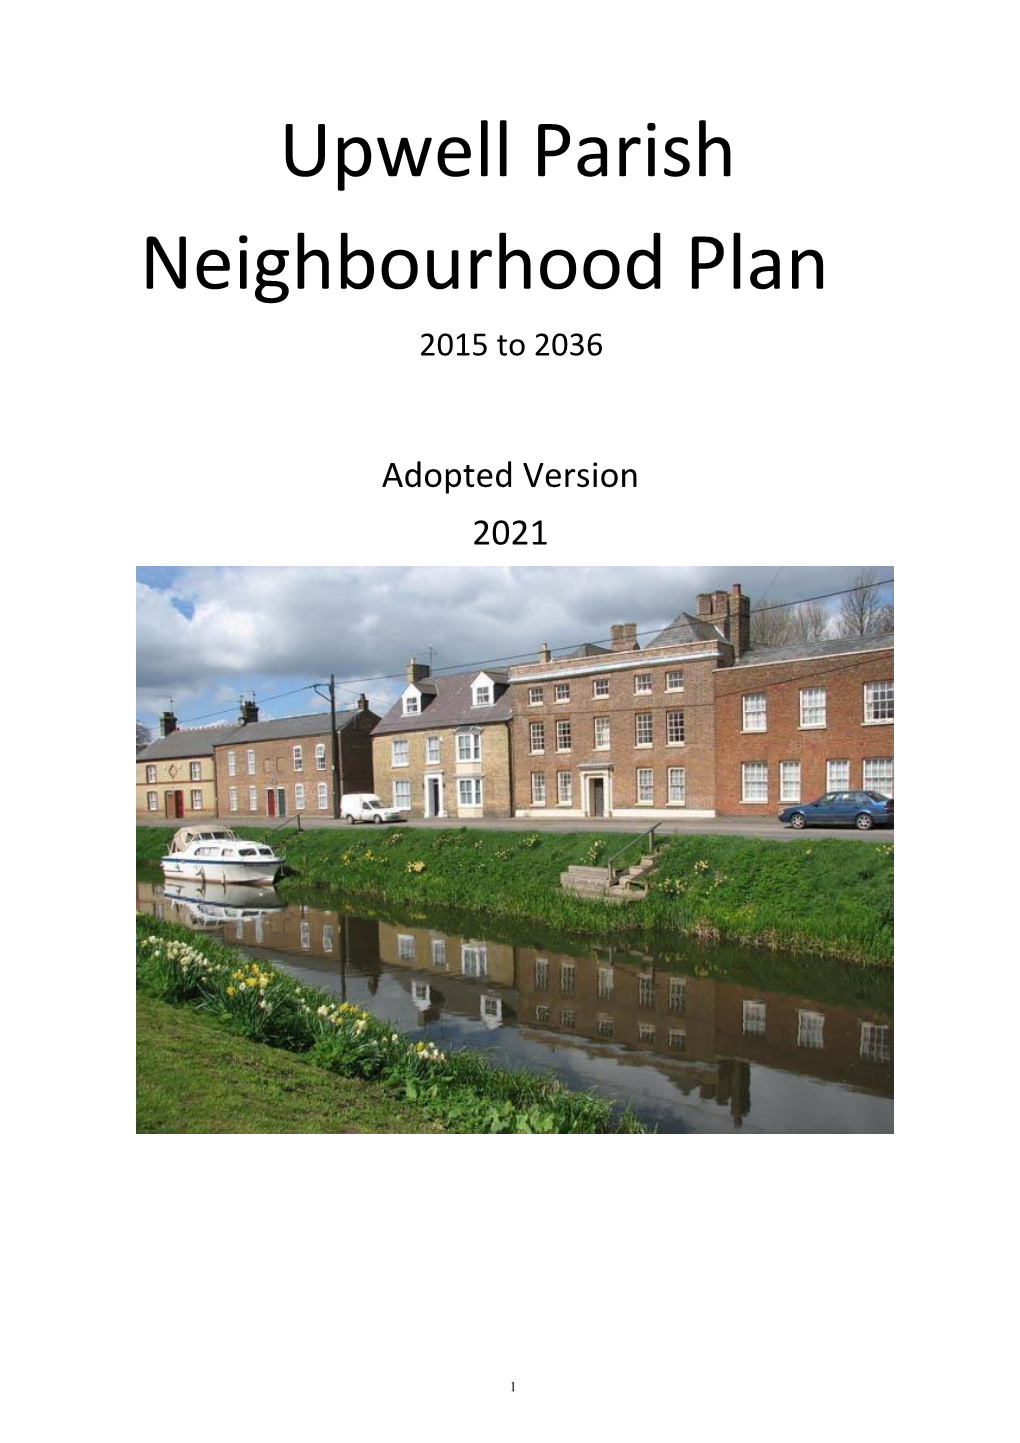 Upwell Parish Neighbourhood Plan Decided to Allocate for More Than 50% of Those 67 Additional Dwellings4